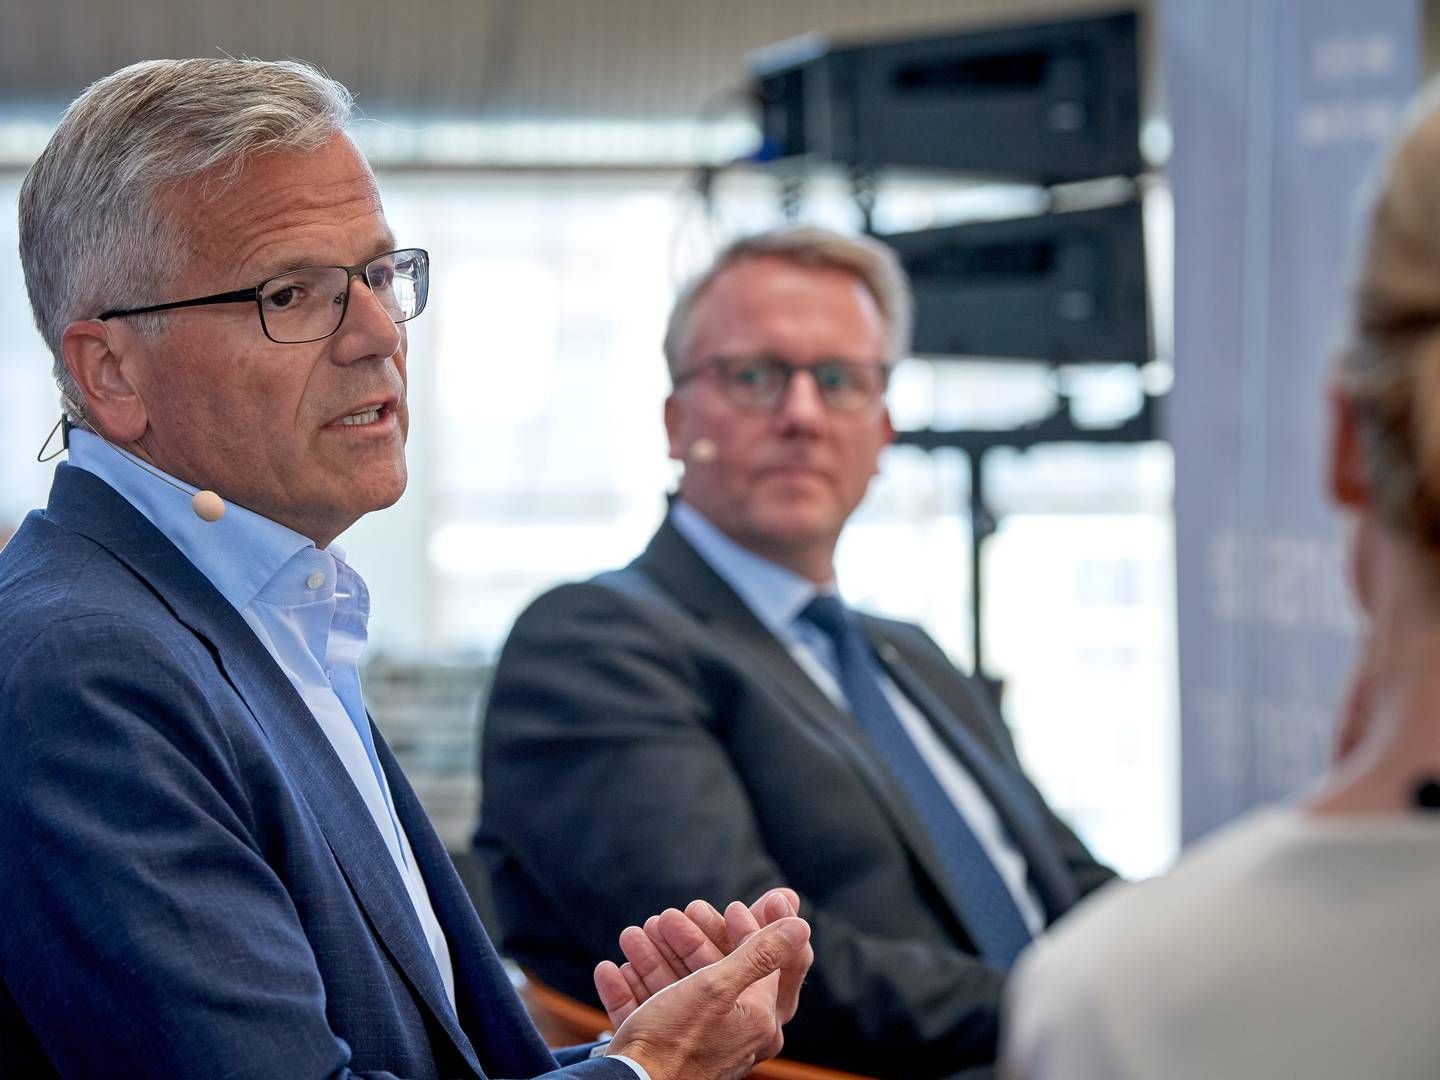 ”I believe that what we see in the US and also a bit in Europe in different ways is that industrial policy from the side of the government is getting increasingly important," said Maersk CEO Vincent Clerc (left) in a discussion with Danish business minister Morten Bødskov on Danish Shipping's annual day. | Photo: Carsten Lundager